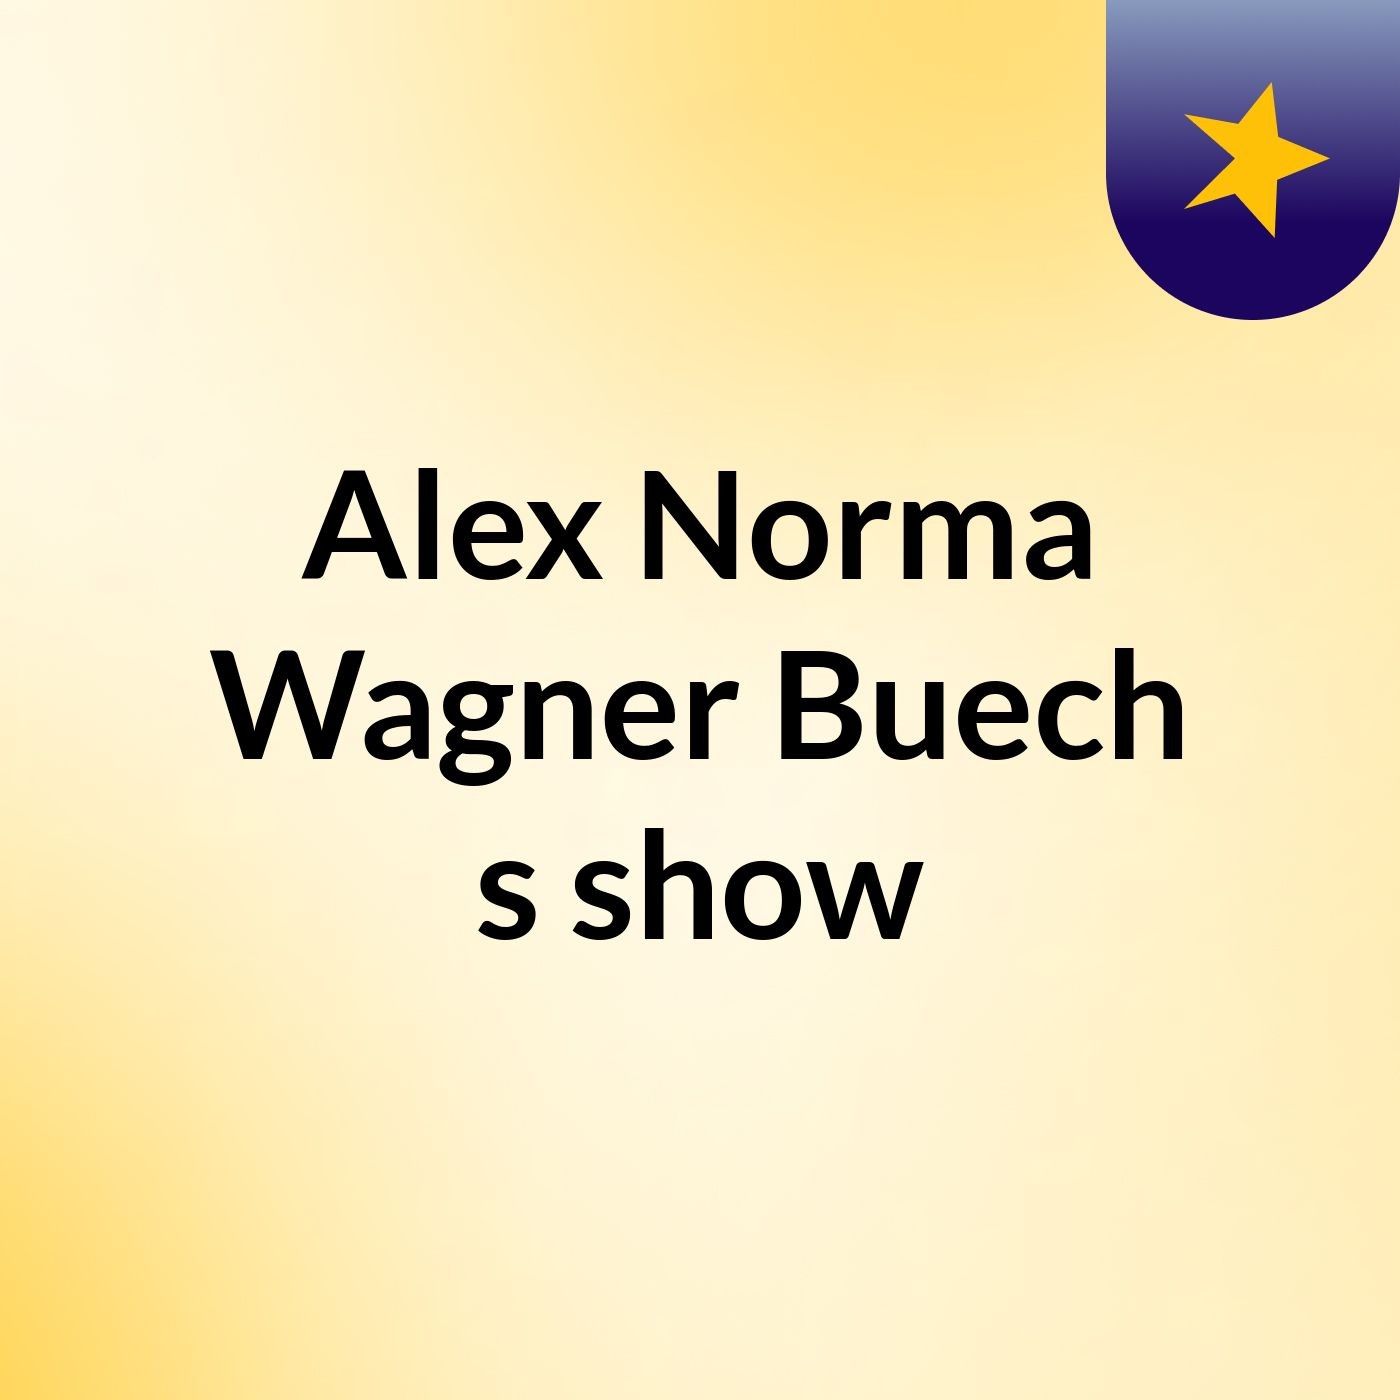 Alex Norma Wagner Buech's show